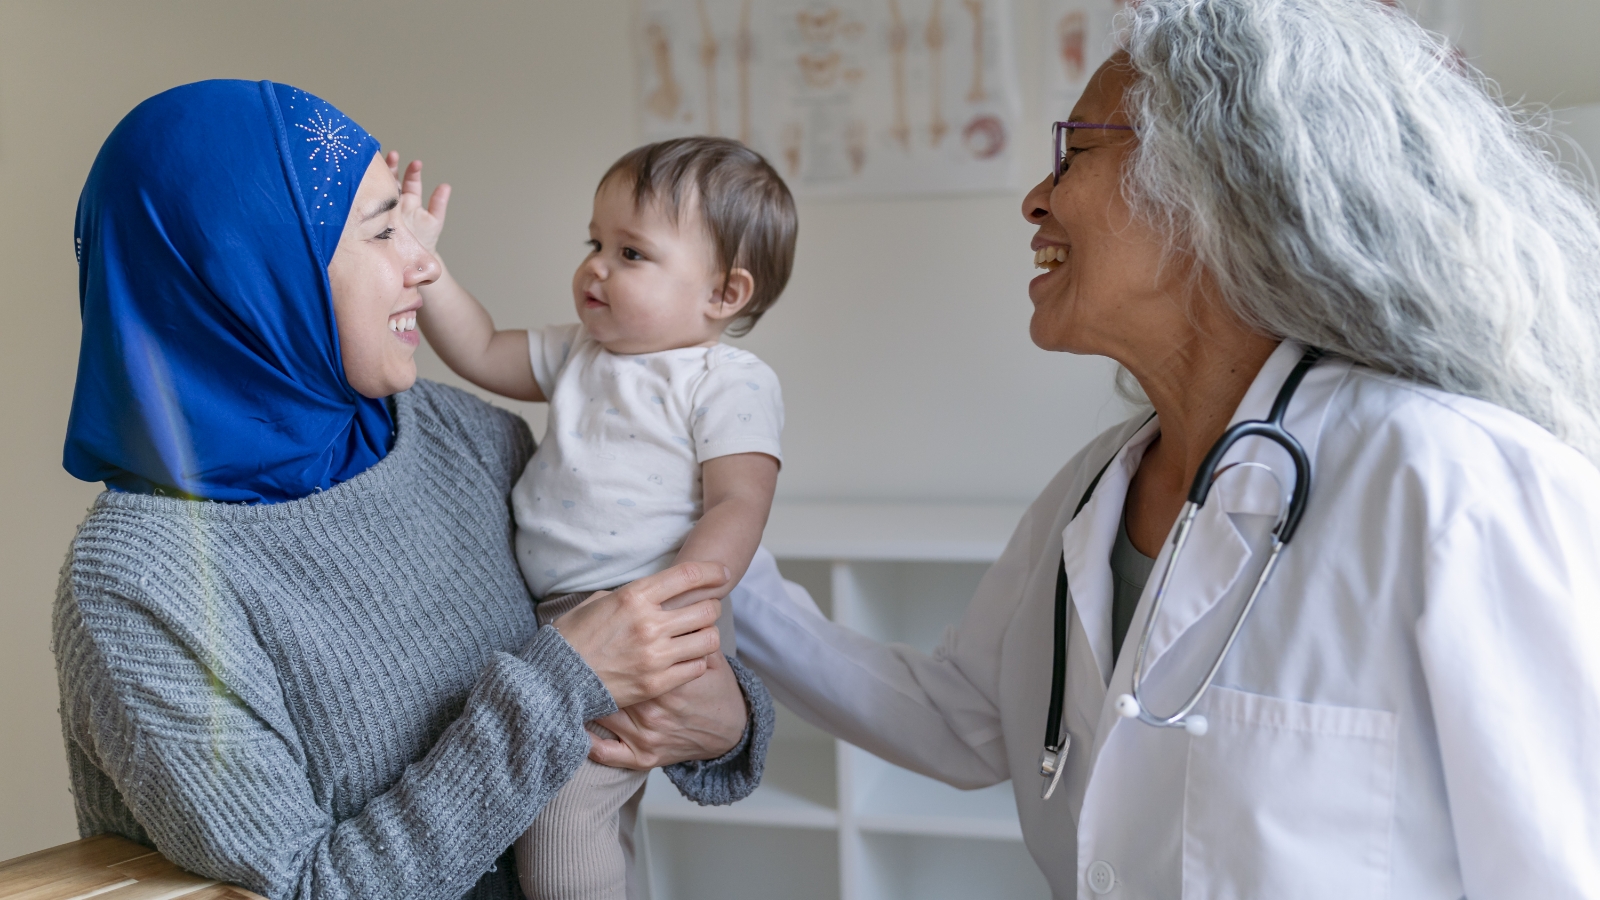 A caregiver holds a baby in their arms while a healthcare provider looks on.